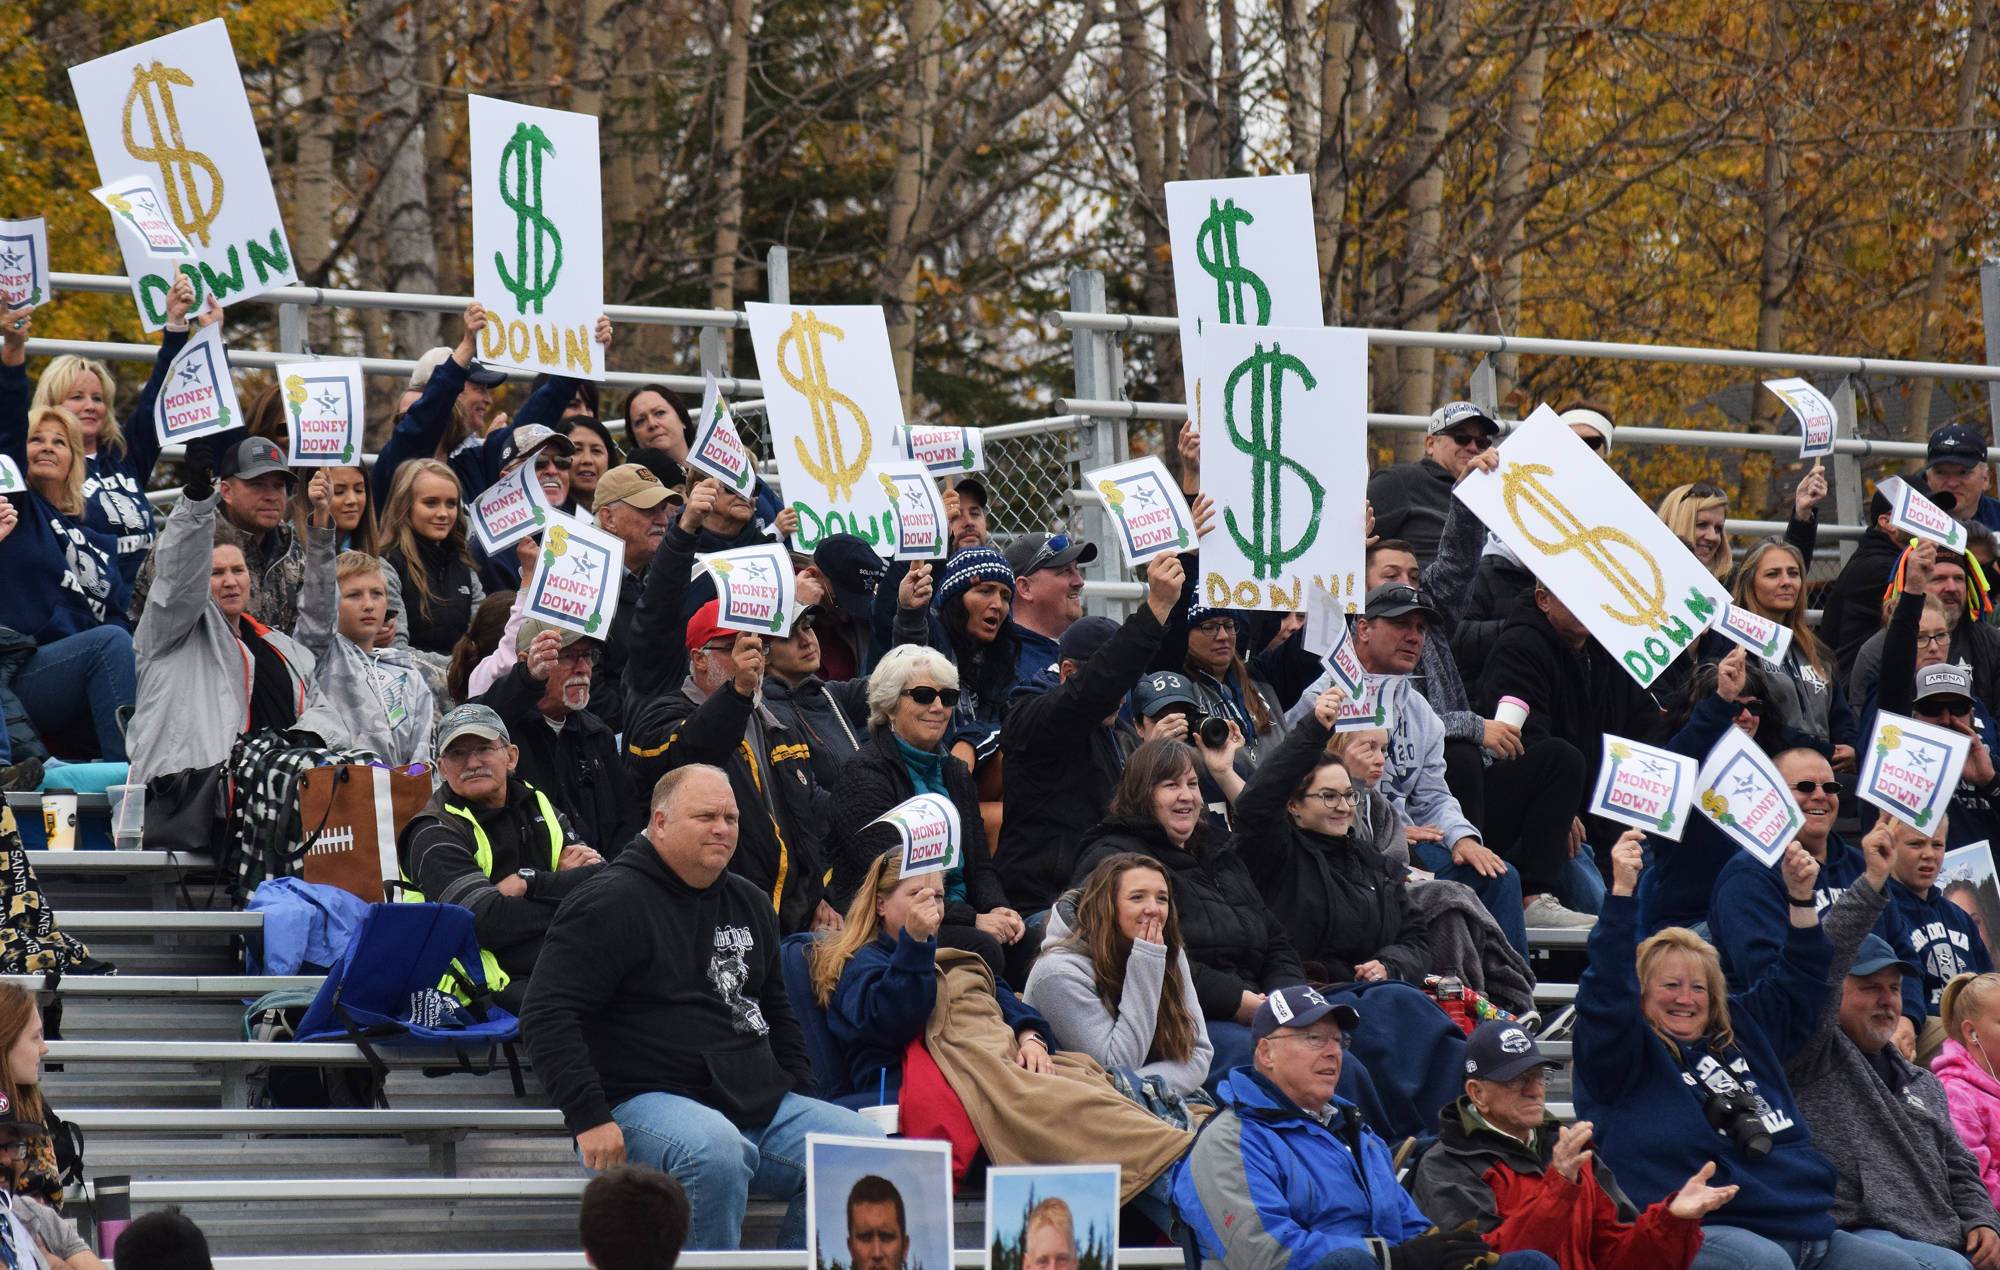 Soldotna football fans cheer on their team in a Division II state semifinal game Saturday afternoon at Palmer’s Machetanz Field. (Photo by Joey Klecka/Peninsula Clarion)